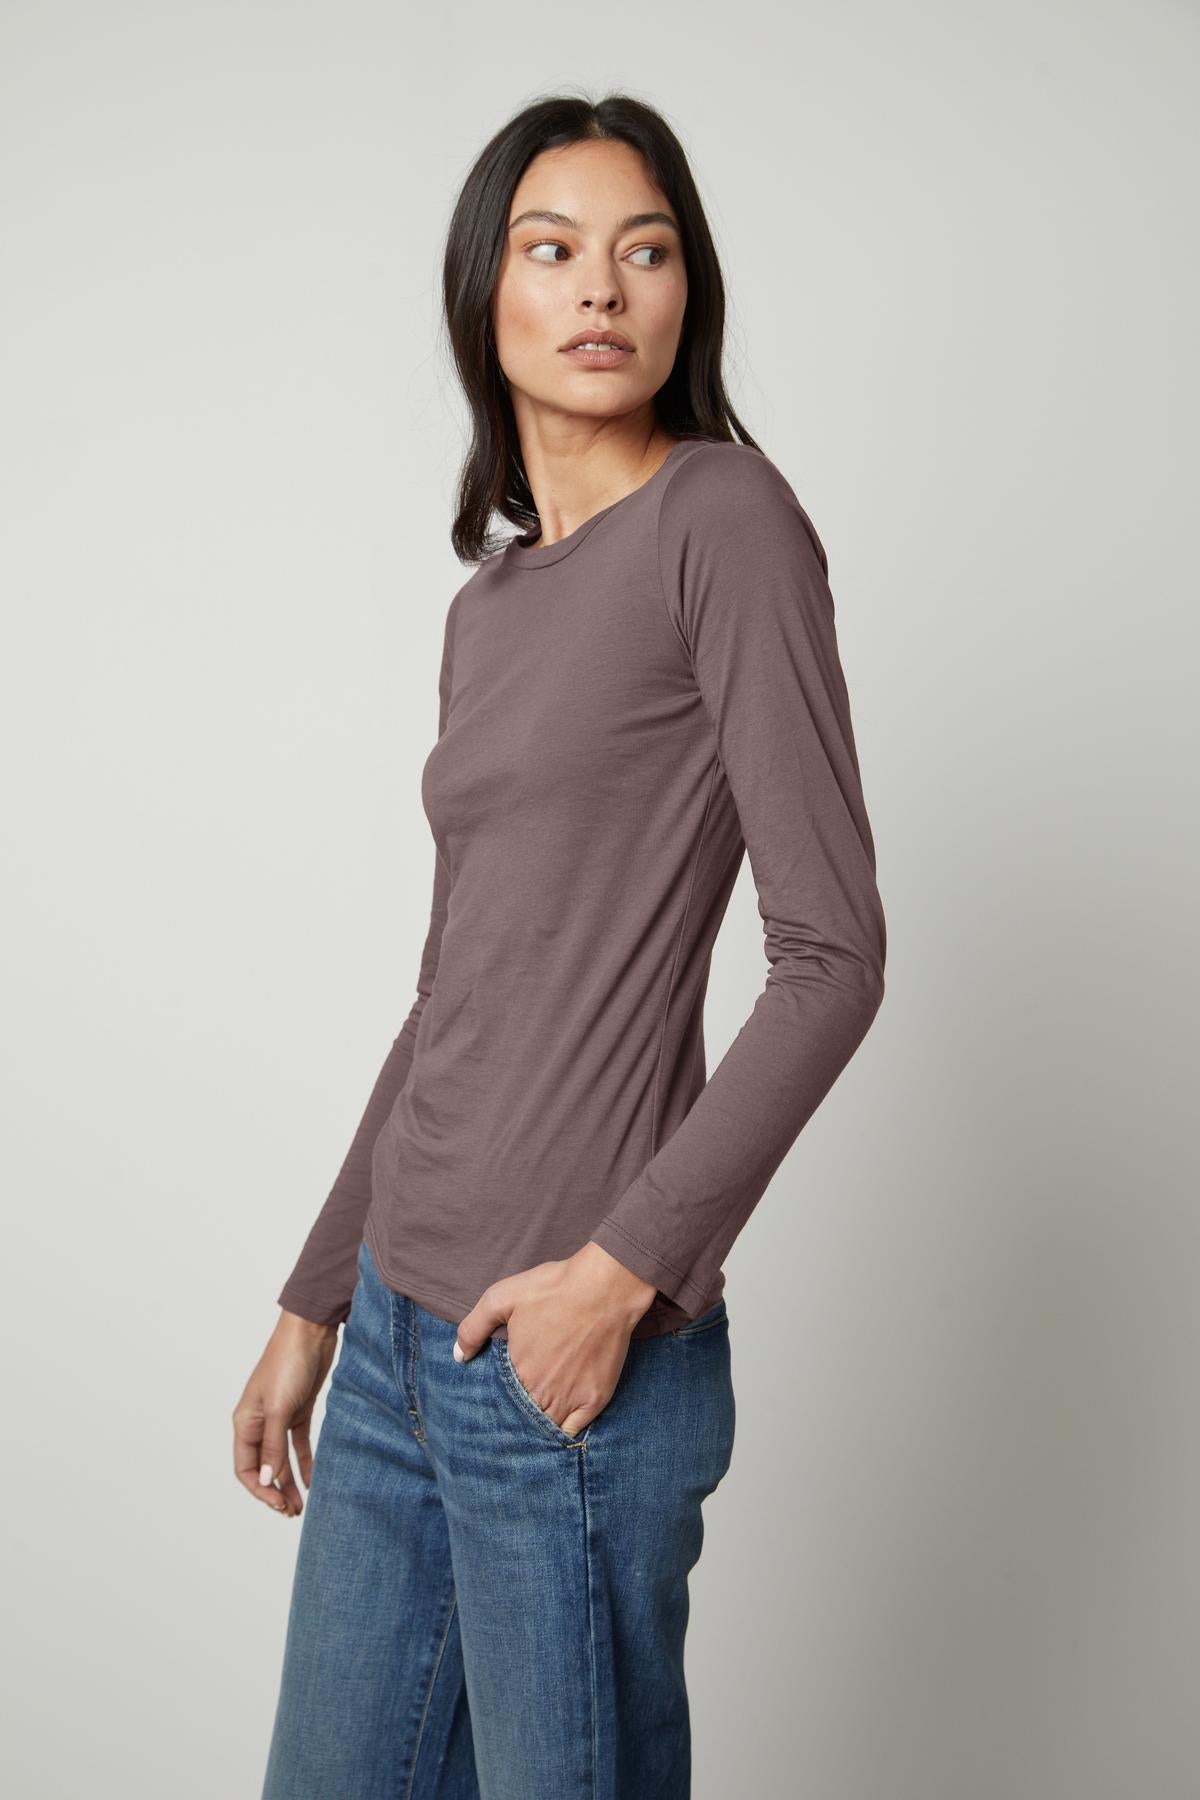 The Velvet by Graham & Spencer ZOFINA GAUZY WHISPER FITTED CREW NECK TEE in dark brown is perfect for any occasion with its universally flattering cut and soft, gauzy whisper cotton fabric.-35503498854593